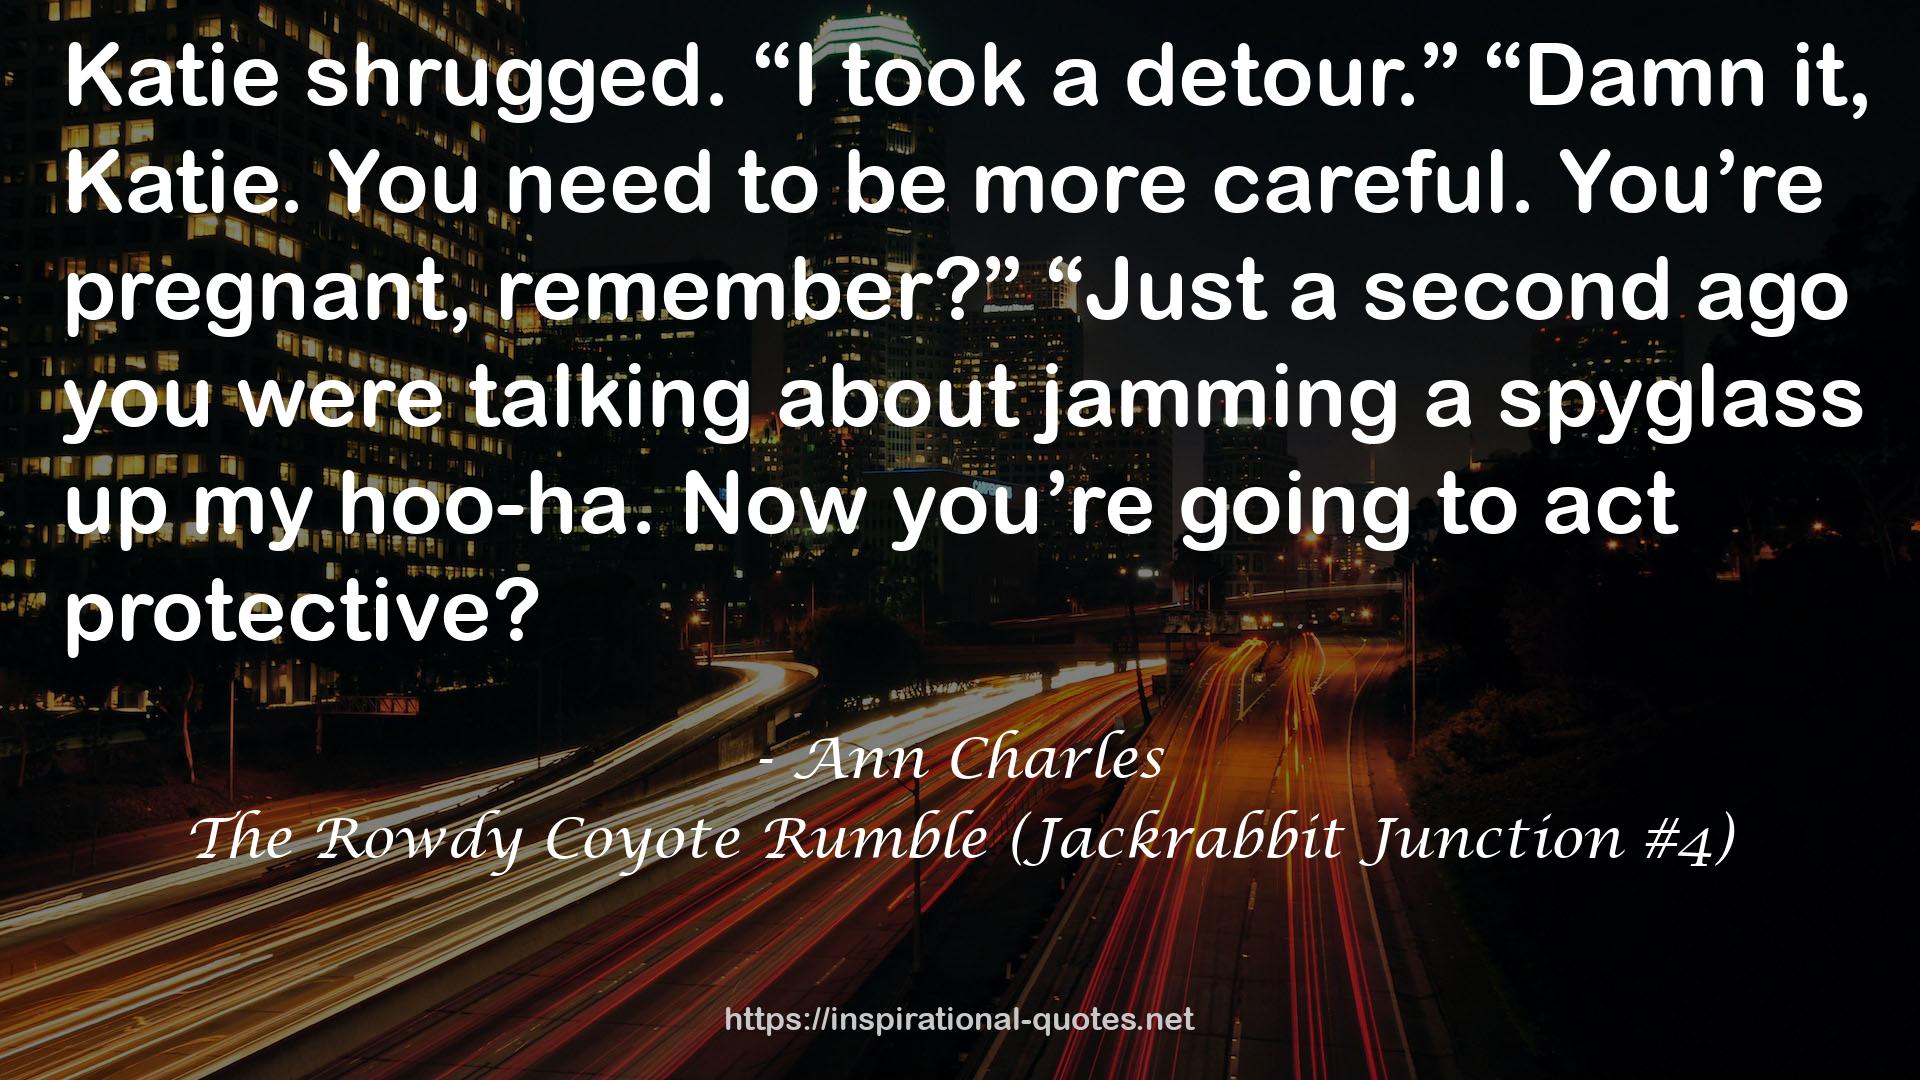 The Rowdy Coyote Rumble (Jackrabbit Junction #4) QUOTES